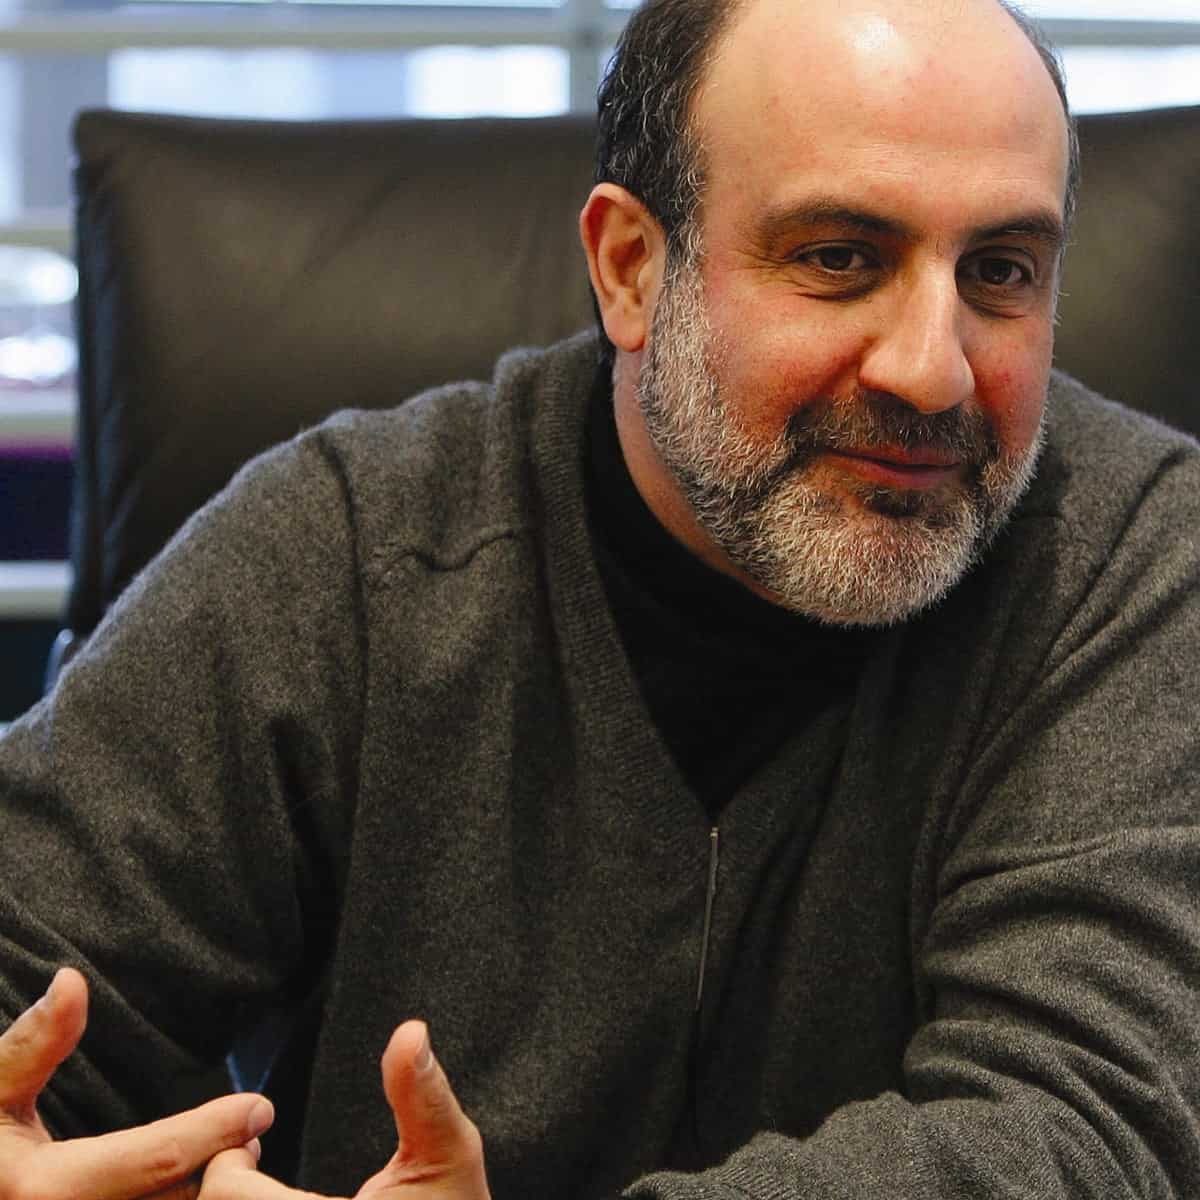 Nassim-taleb-explains-why-he-thinks-bitcoin-fails-as-money-and-store-of-value